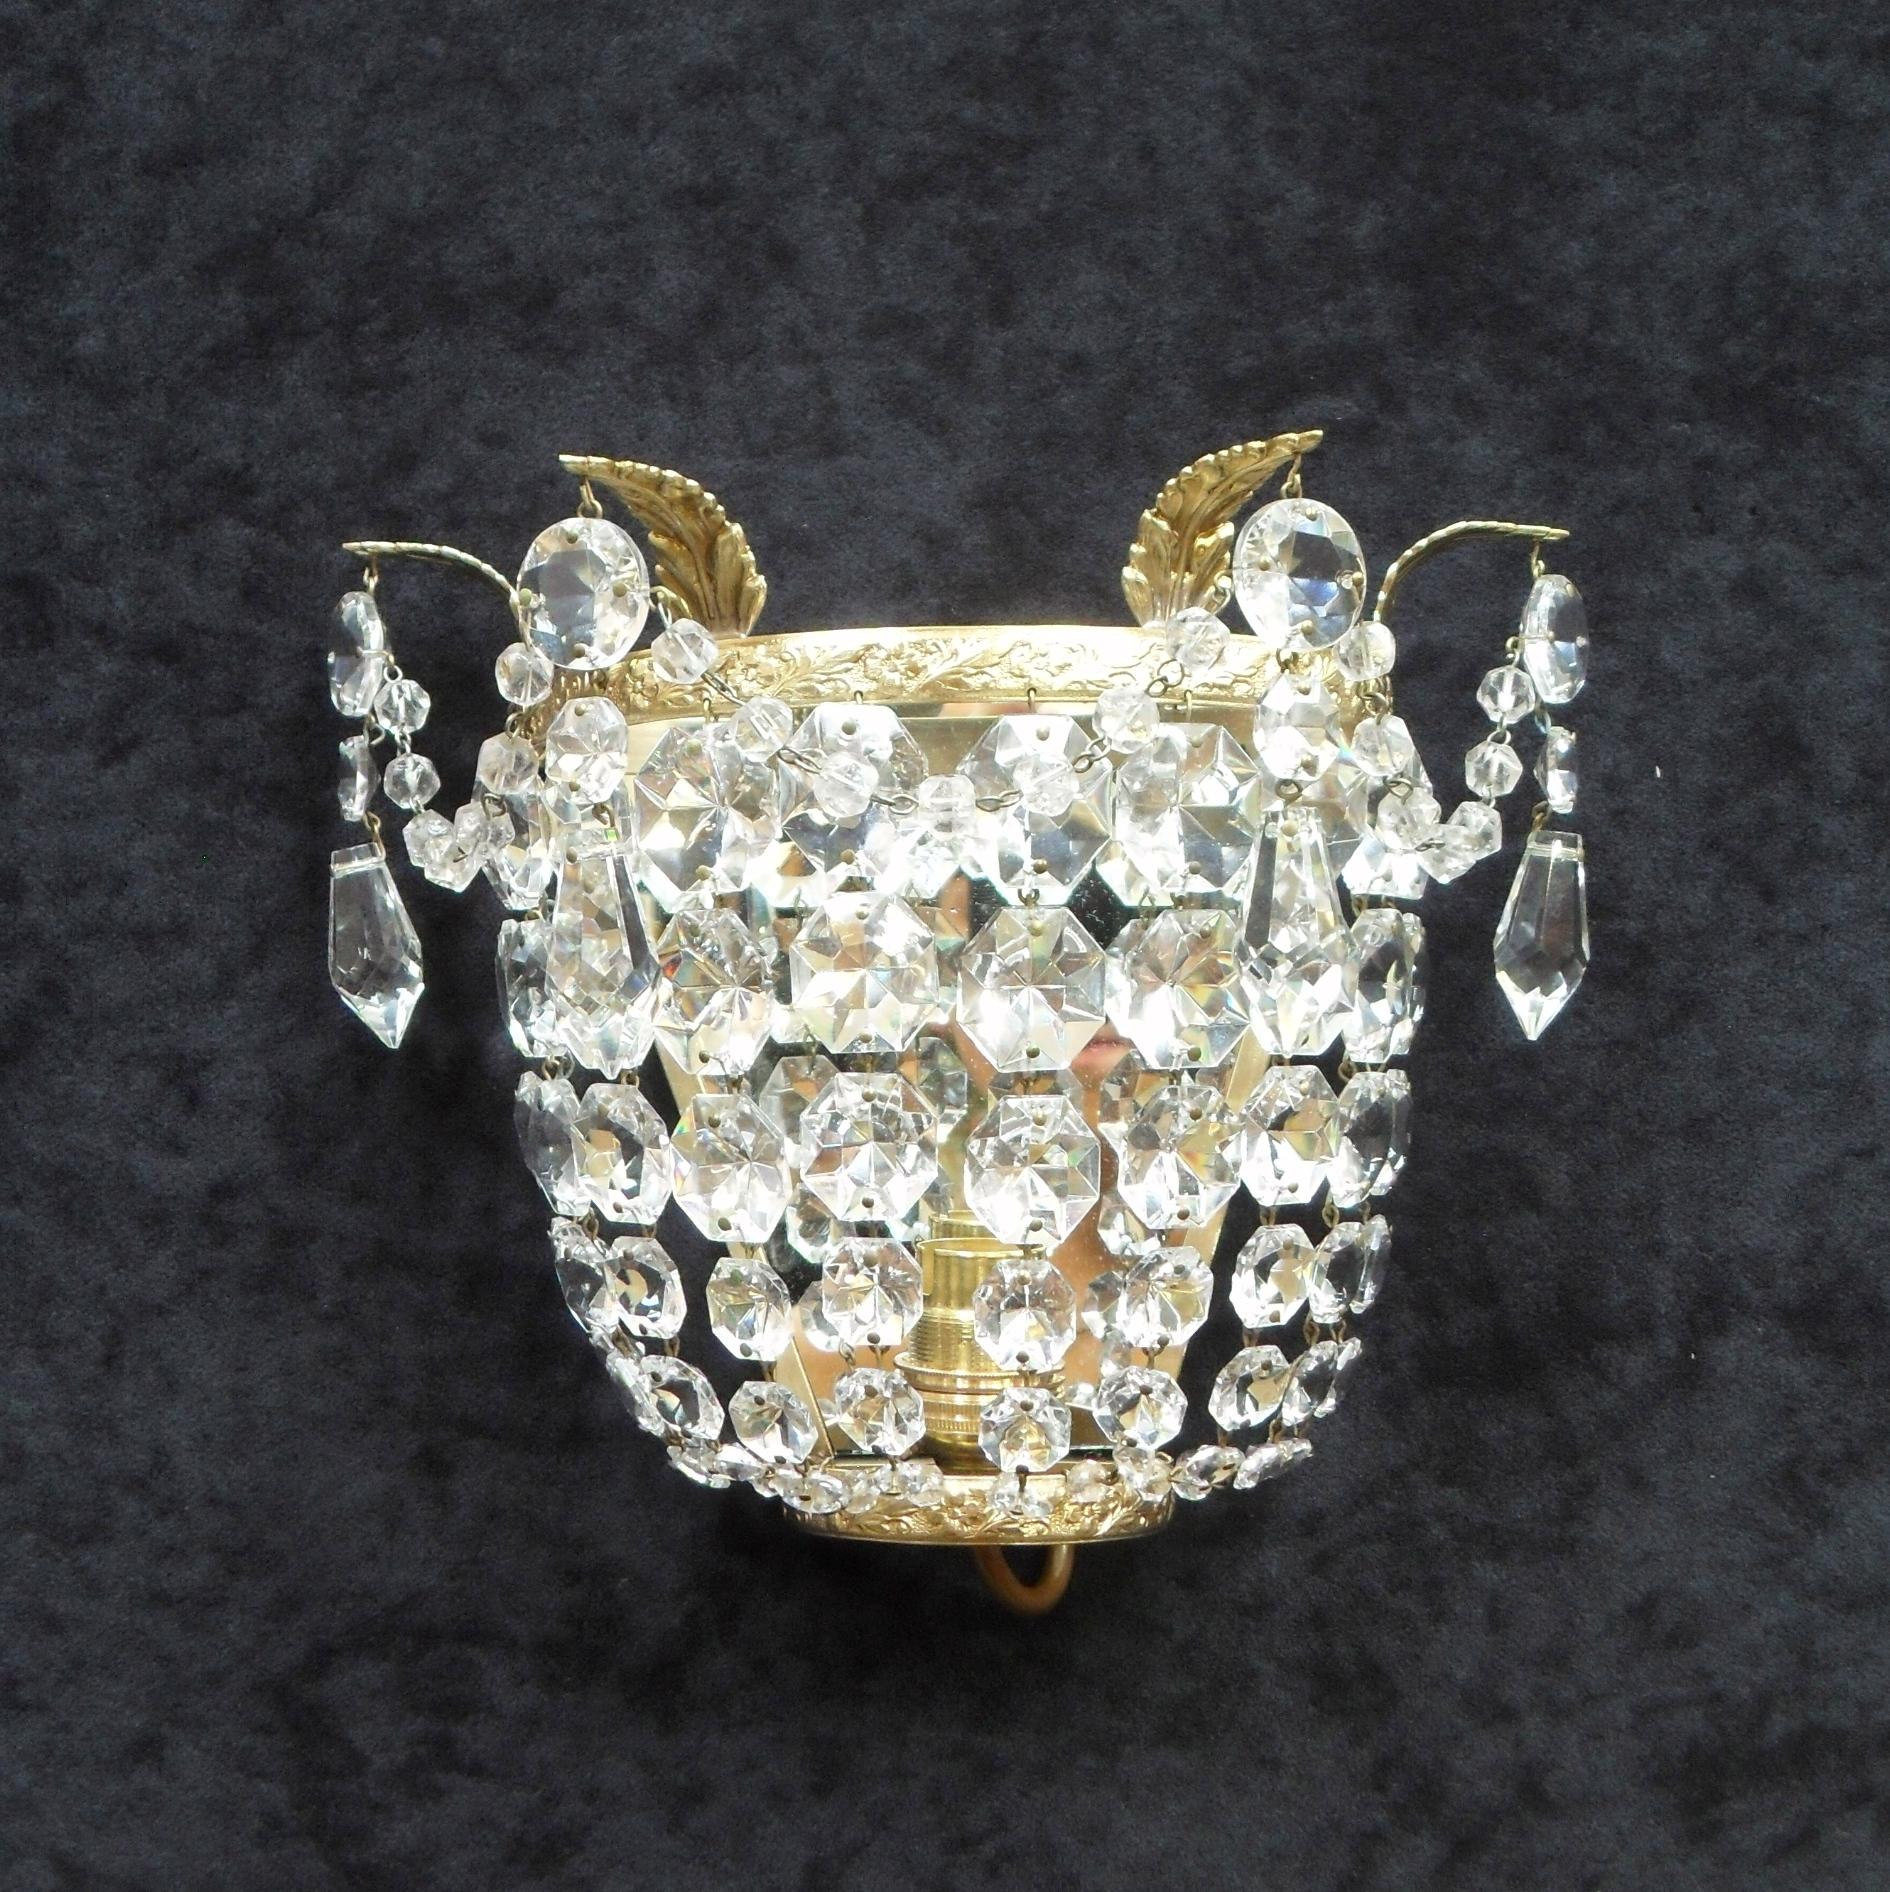 An extremely good quality pair of Italian Art Deco basket shaped wall lights with graduating diamond shaped cut crystal glass, glass beaded swags and hanging pendants. The lights have decorative floral leaf scrolling brass frames with four hanging